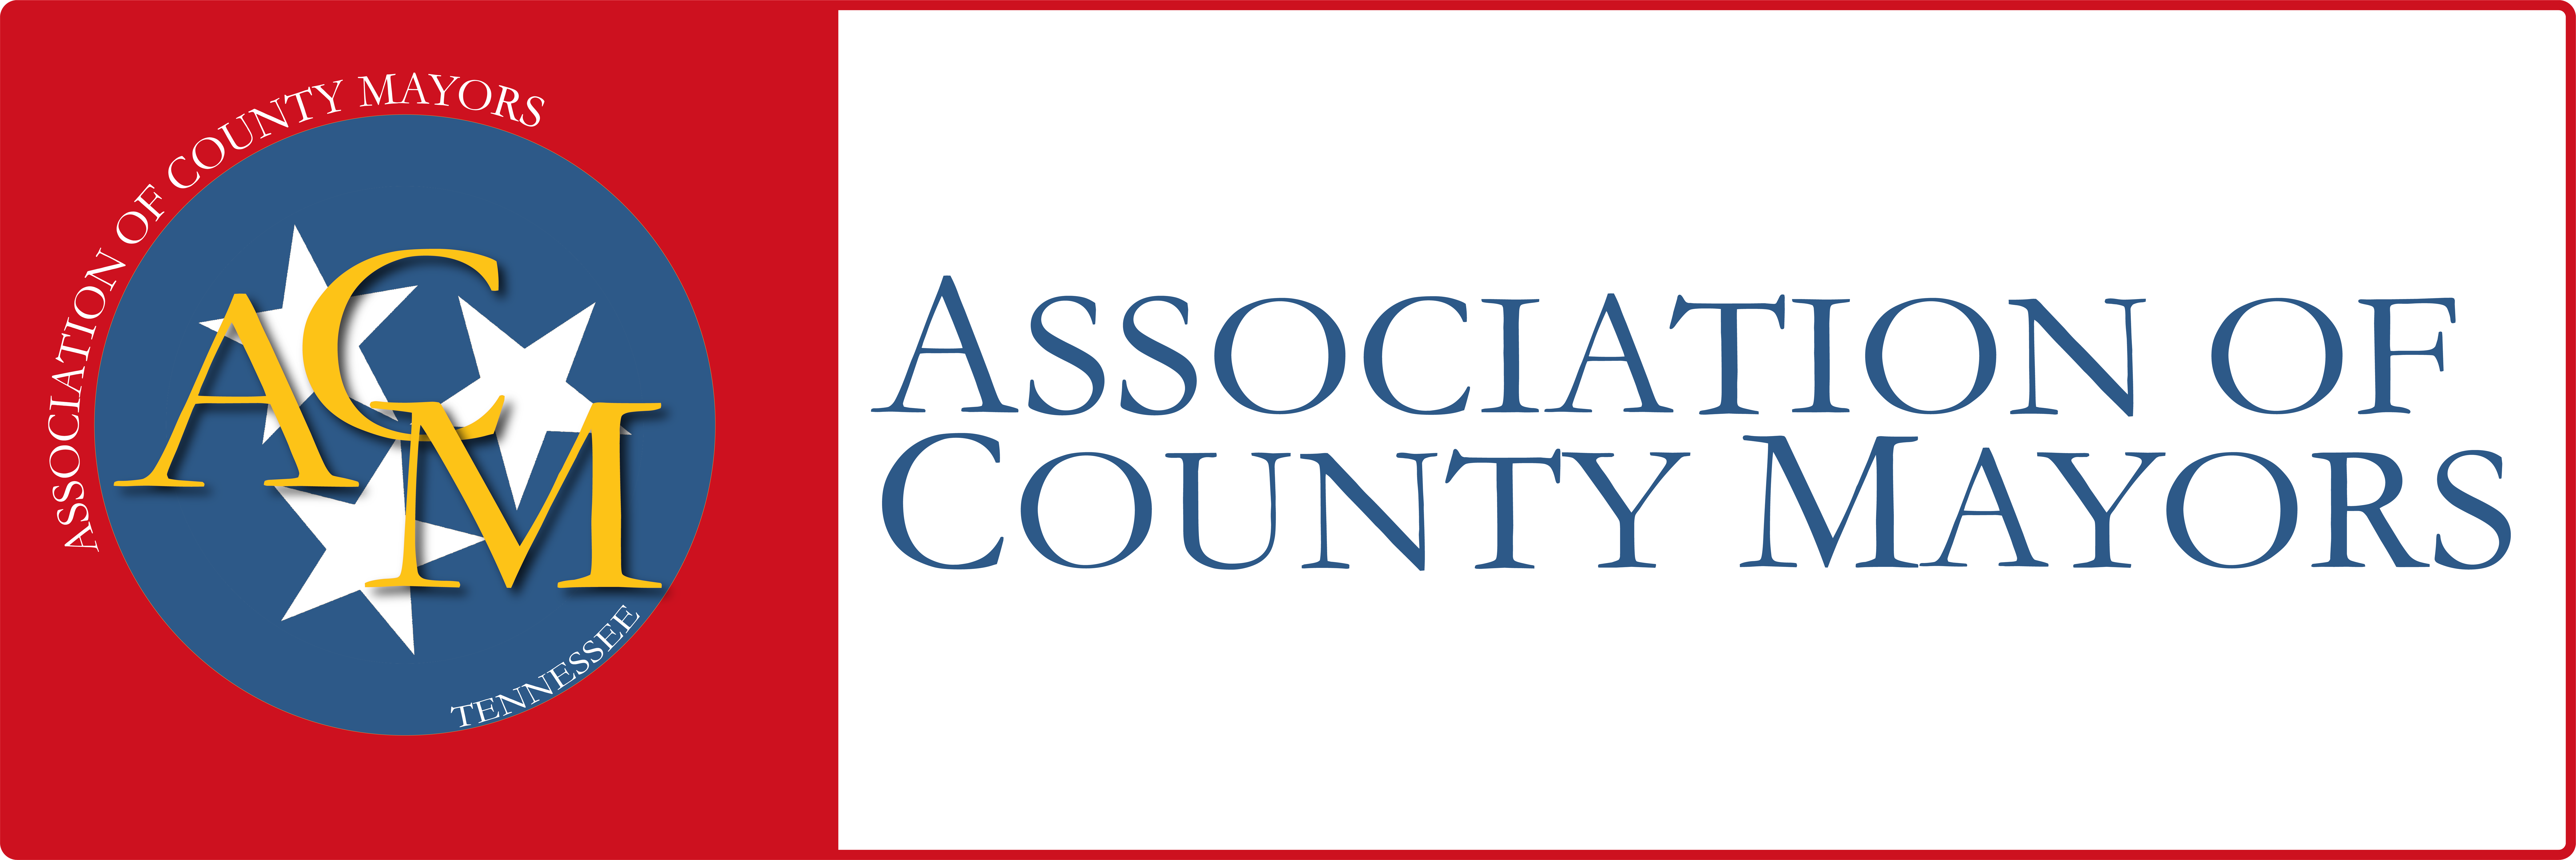 Logo showing three stars and text of Association of County Mayors